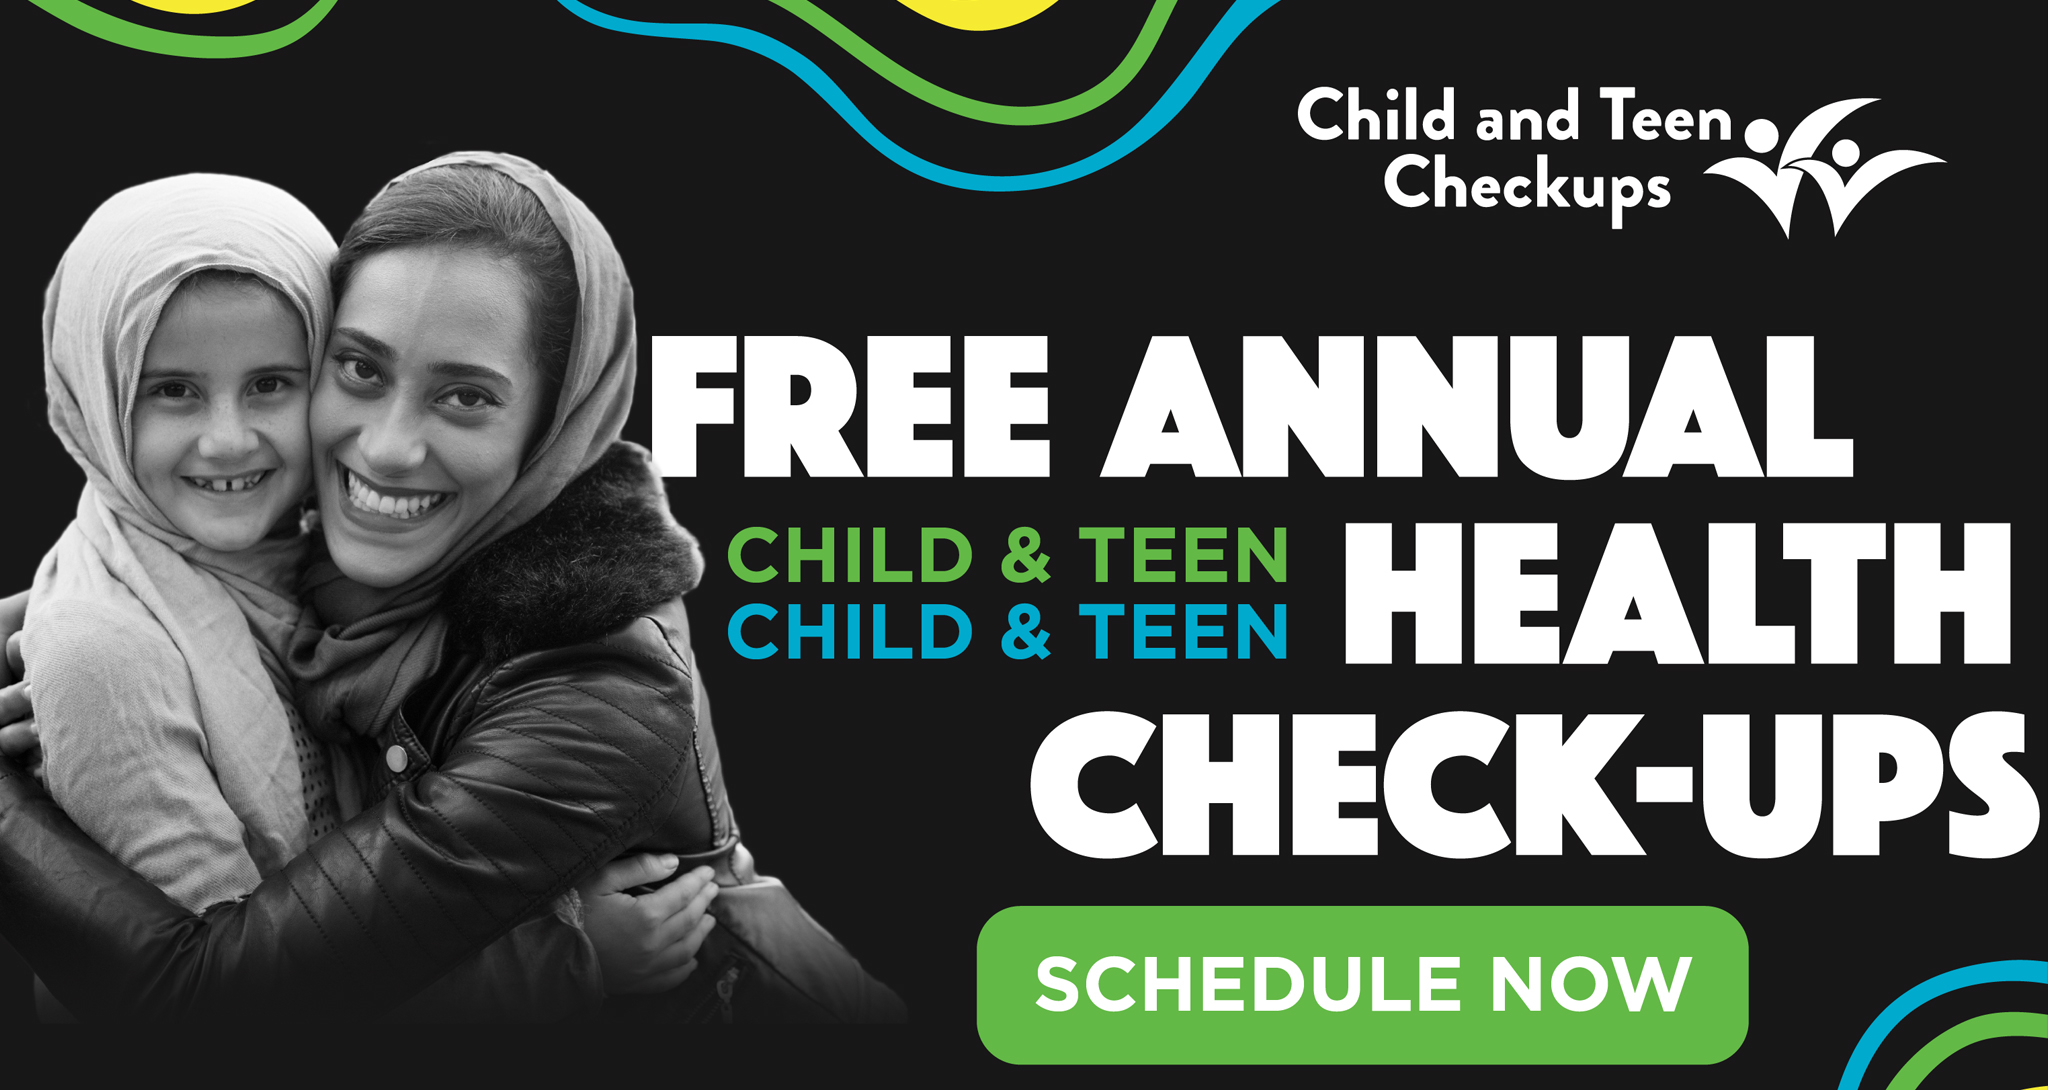 Mother and daughter in hijabs, hugging. Text overlay reads Free annual health checkups for children and teens